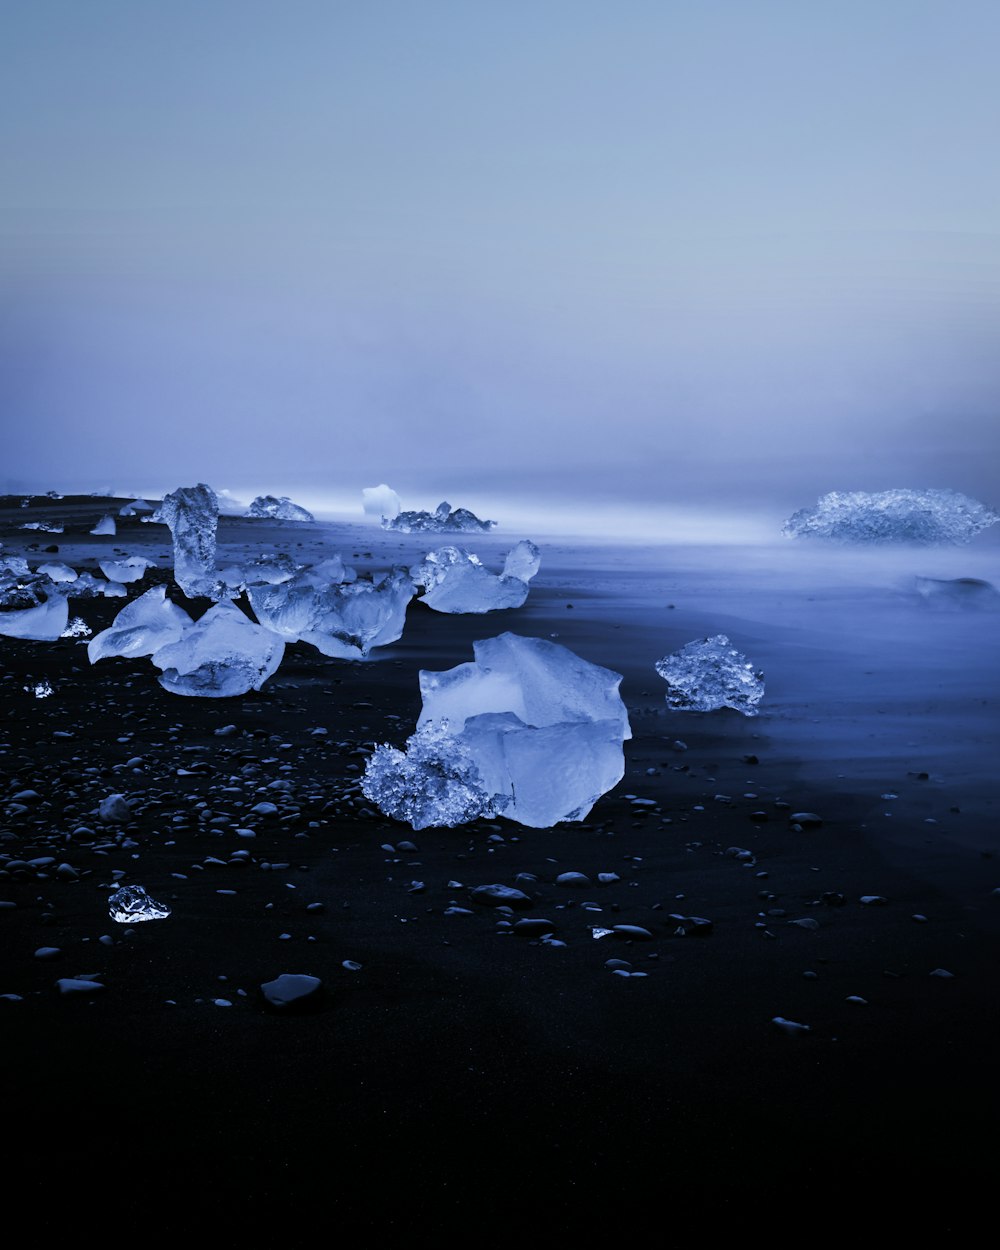 icebergs floating in the water on a beach